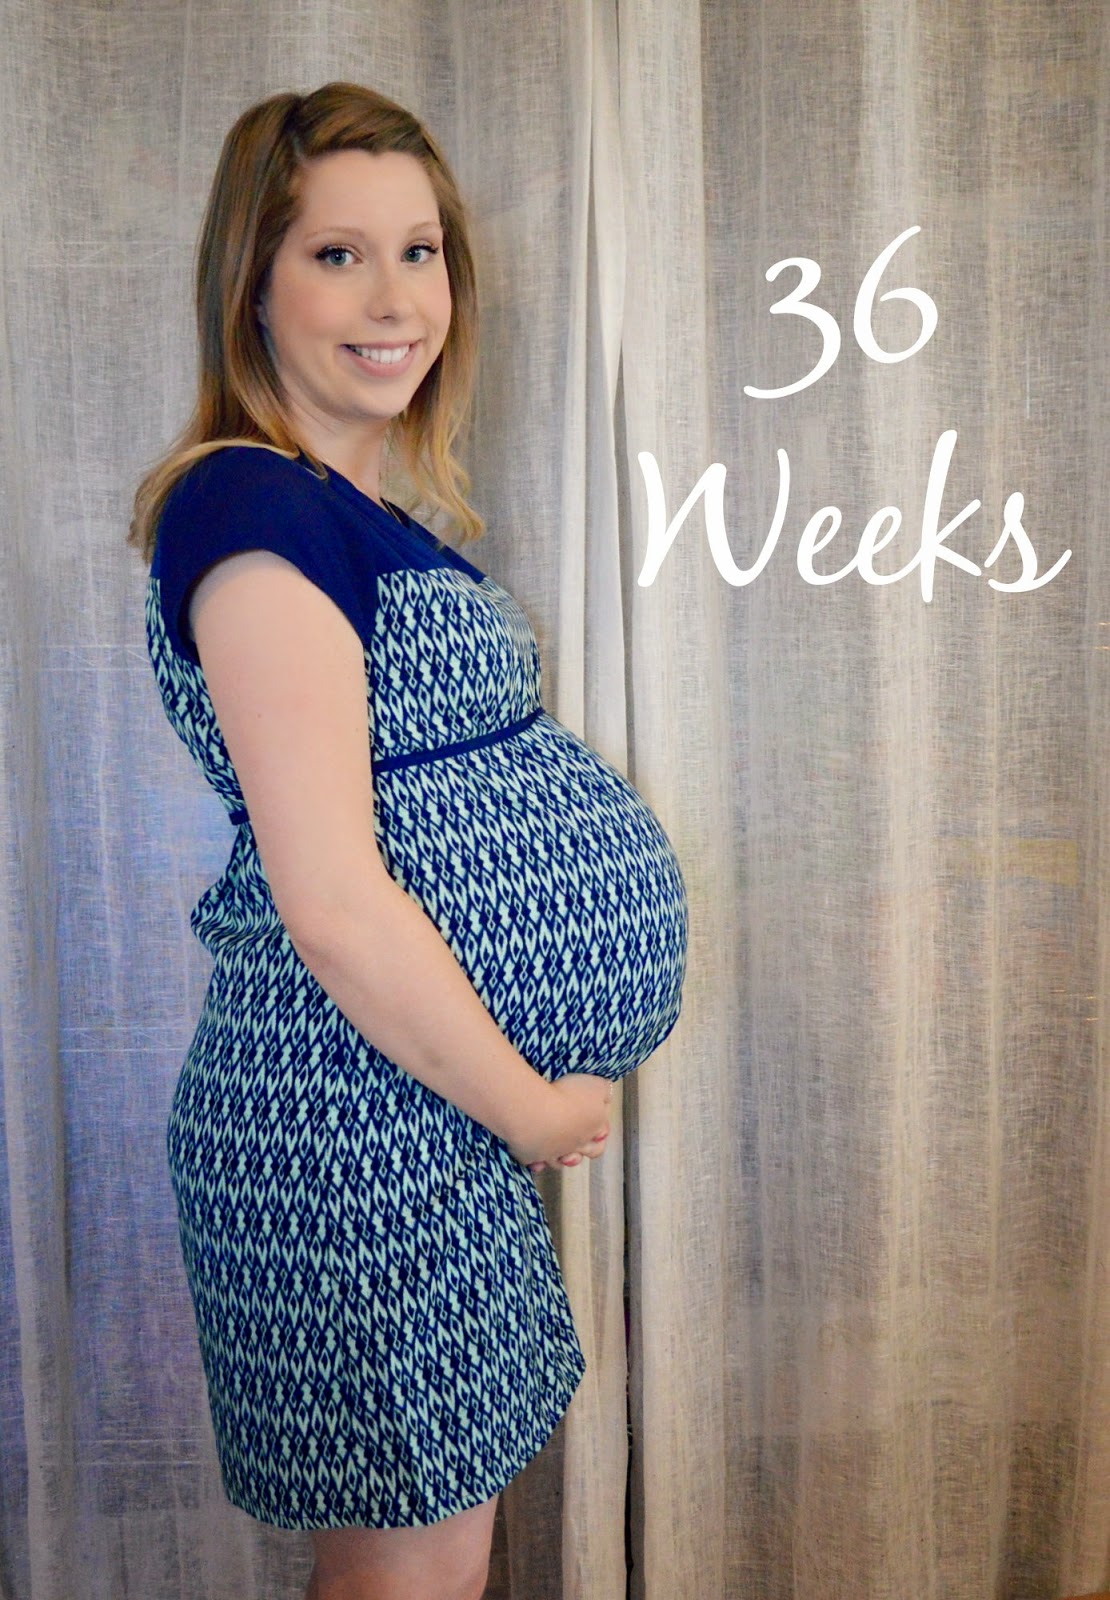 36 weeks pregnant - The Maternity Gallery